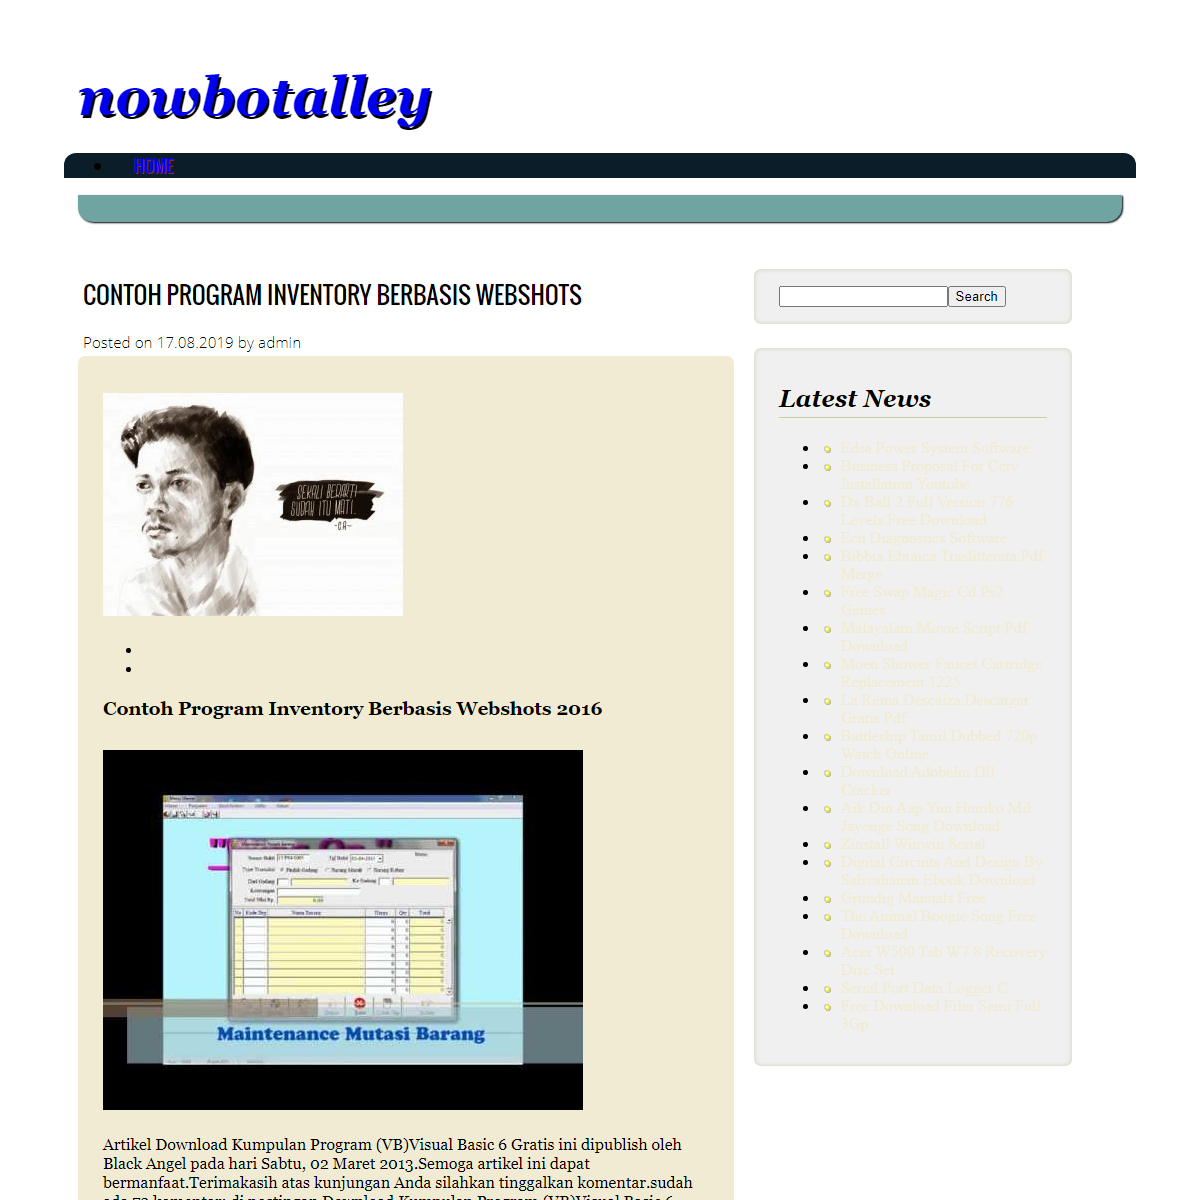 A complete backup of https://nowbotalley.netlify.app/contoh-program-inventory-berbasis-webshots.html